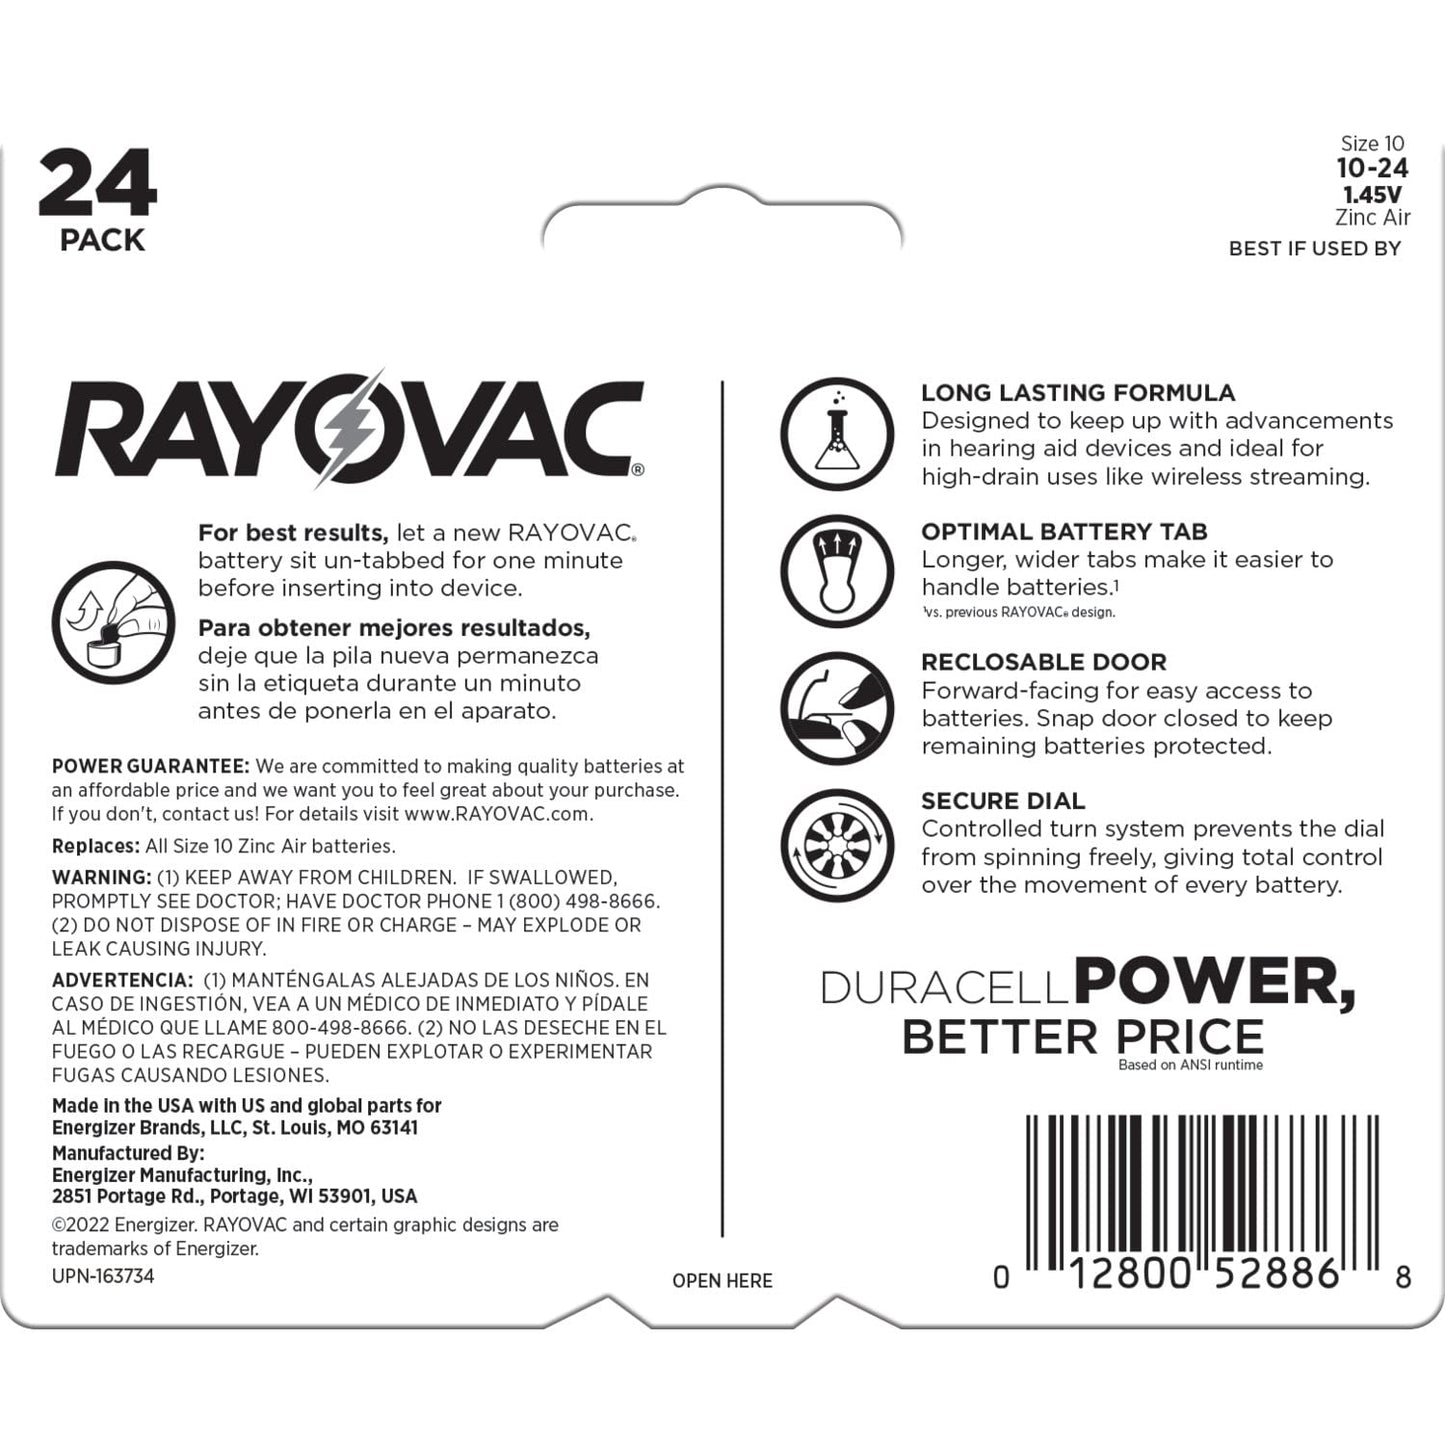 Rayovac Size 10 Hearing Aid Batteries (24 Pack), Size 10 Batteries